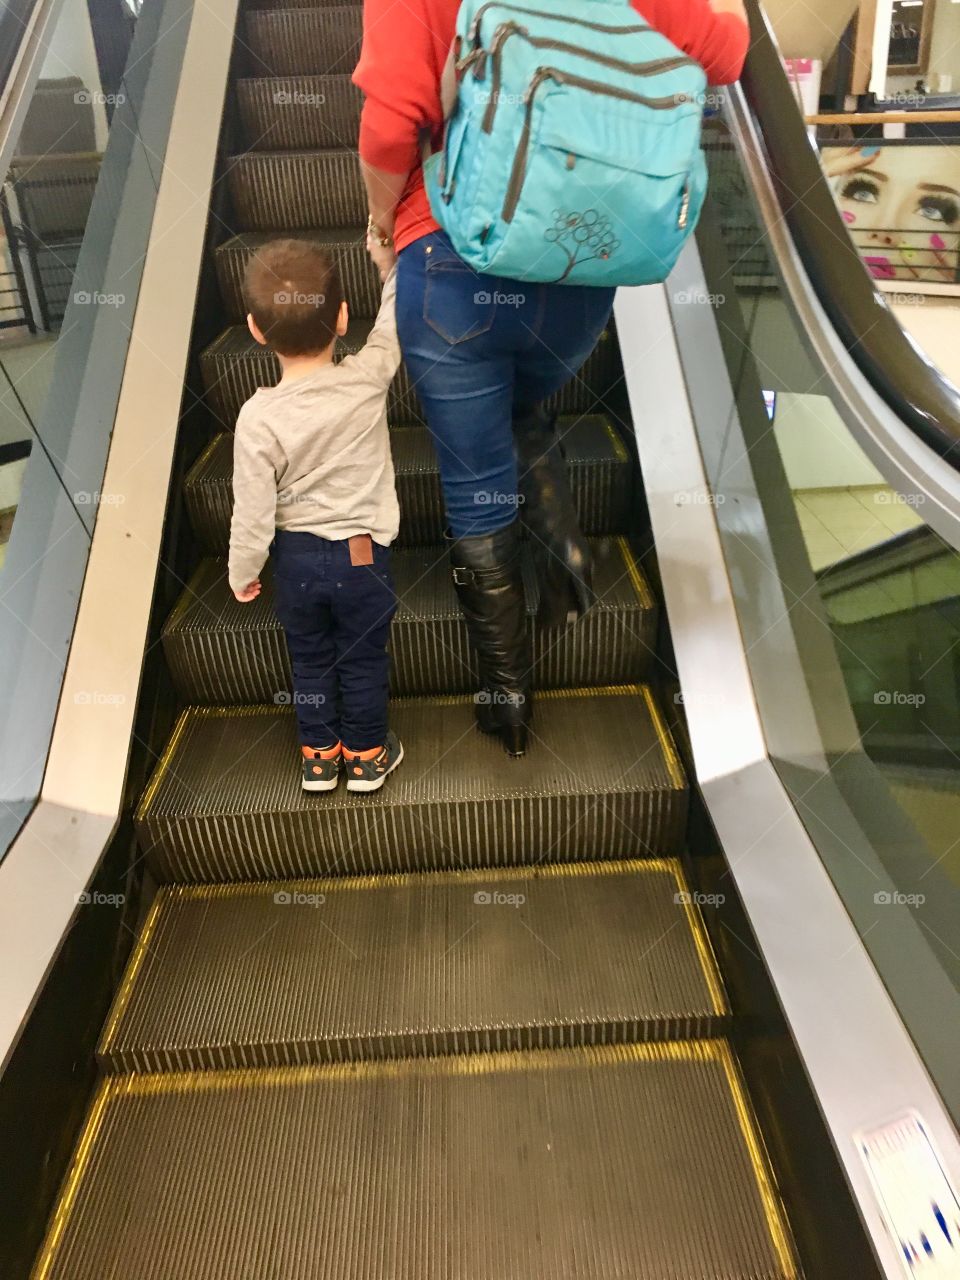 Mother and child go up the escalator